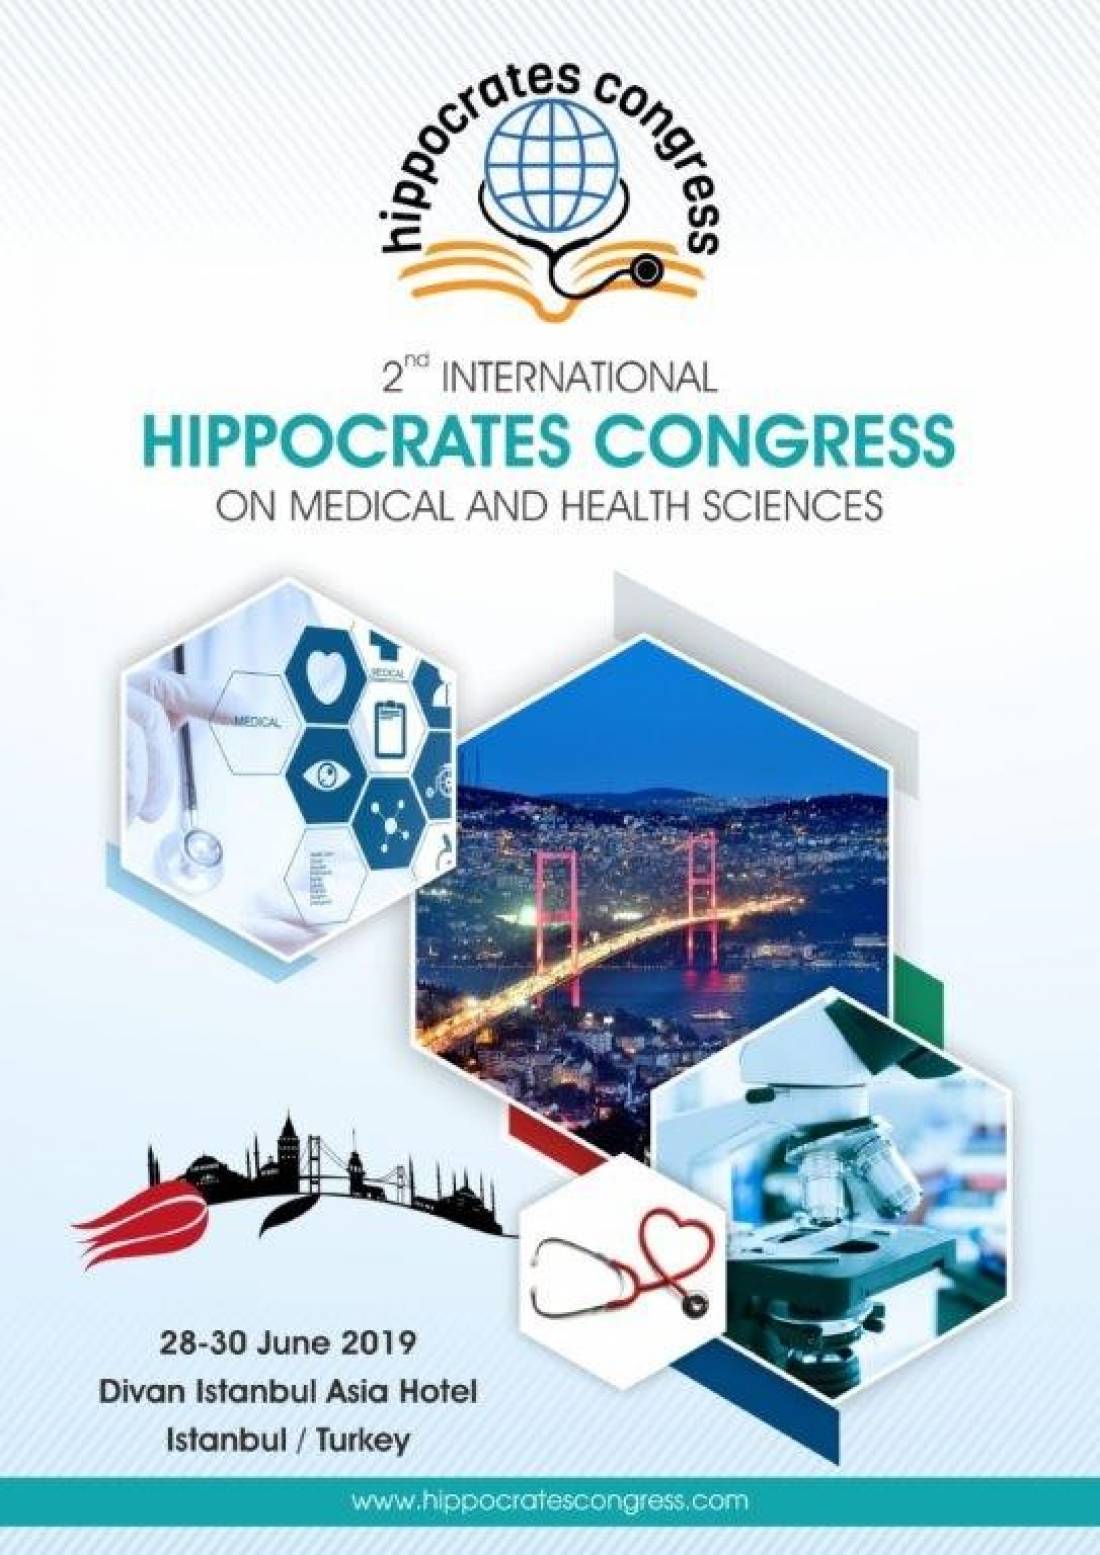 2nd International Hippocrates Congress on Medical and Health Sciences, Istanbul 28.-30.6. 2019.